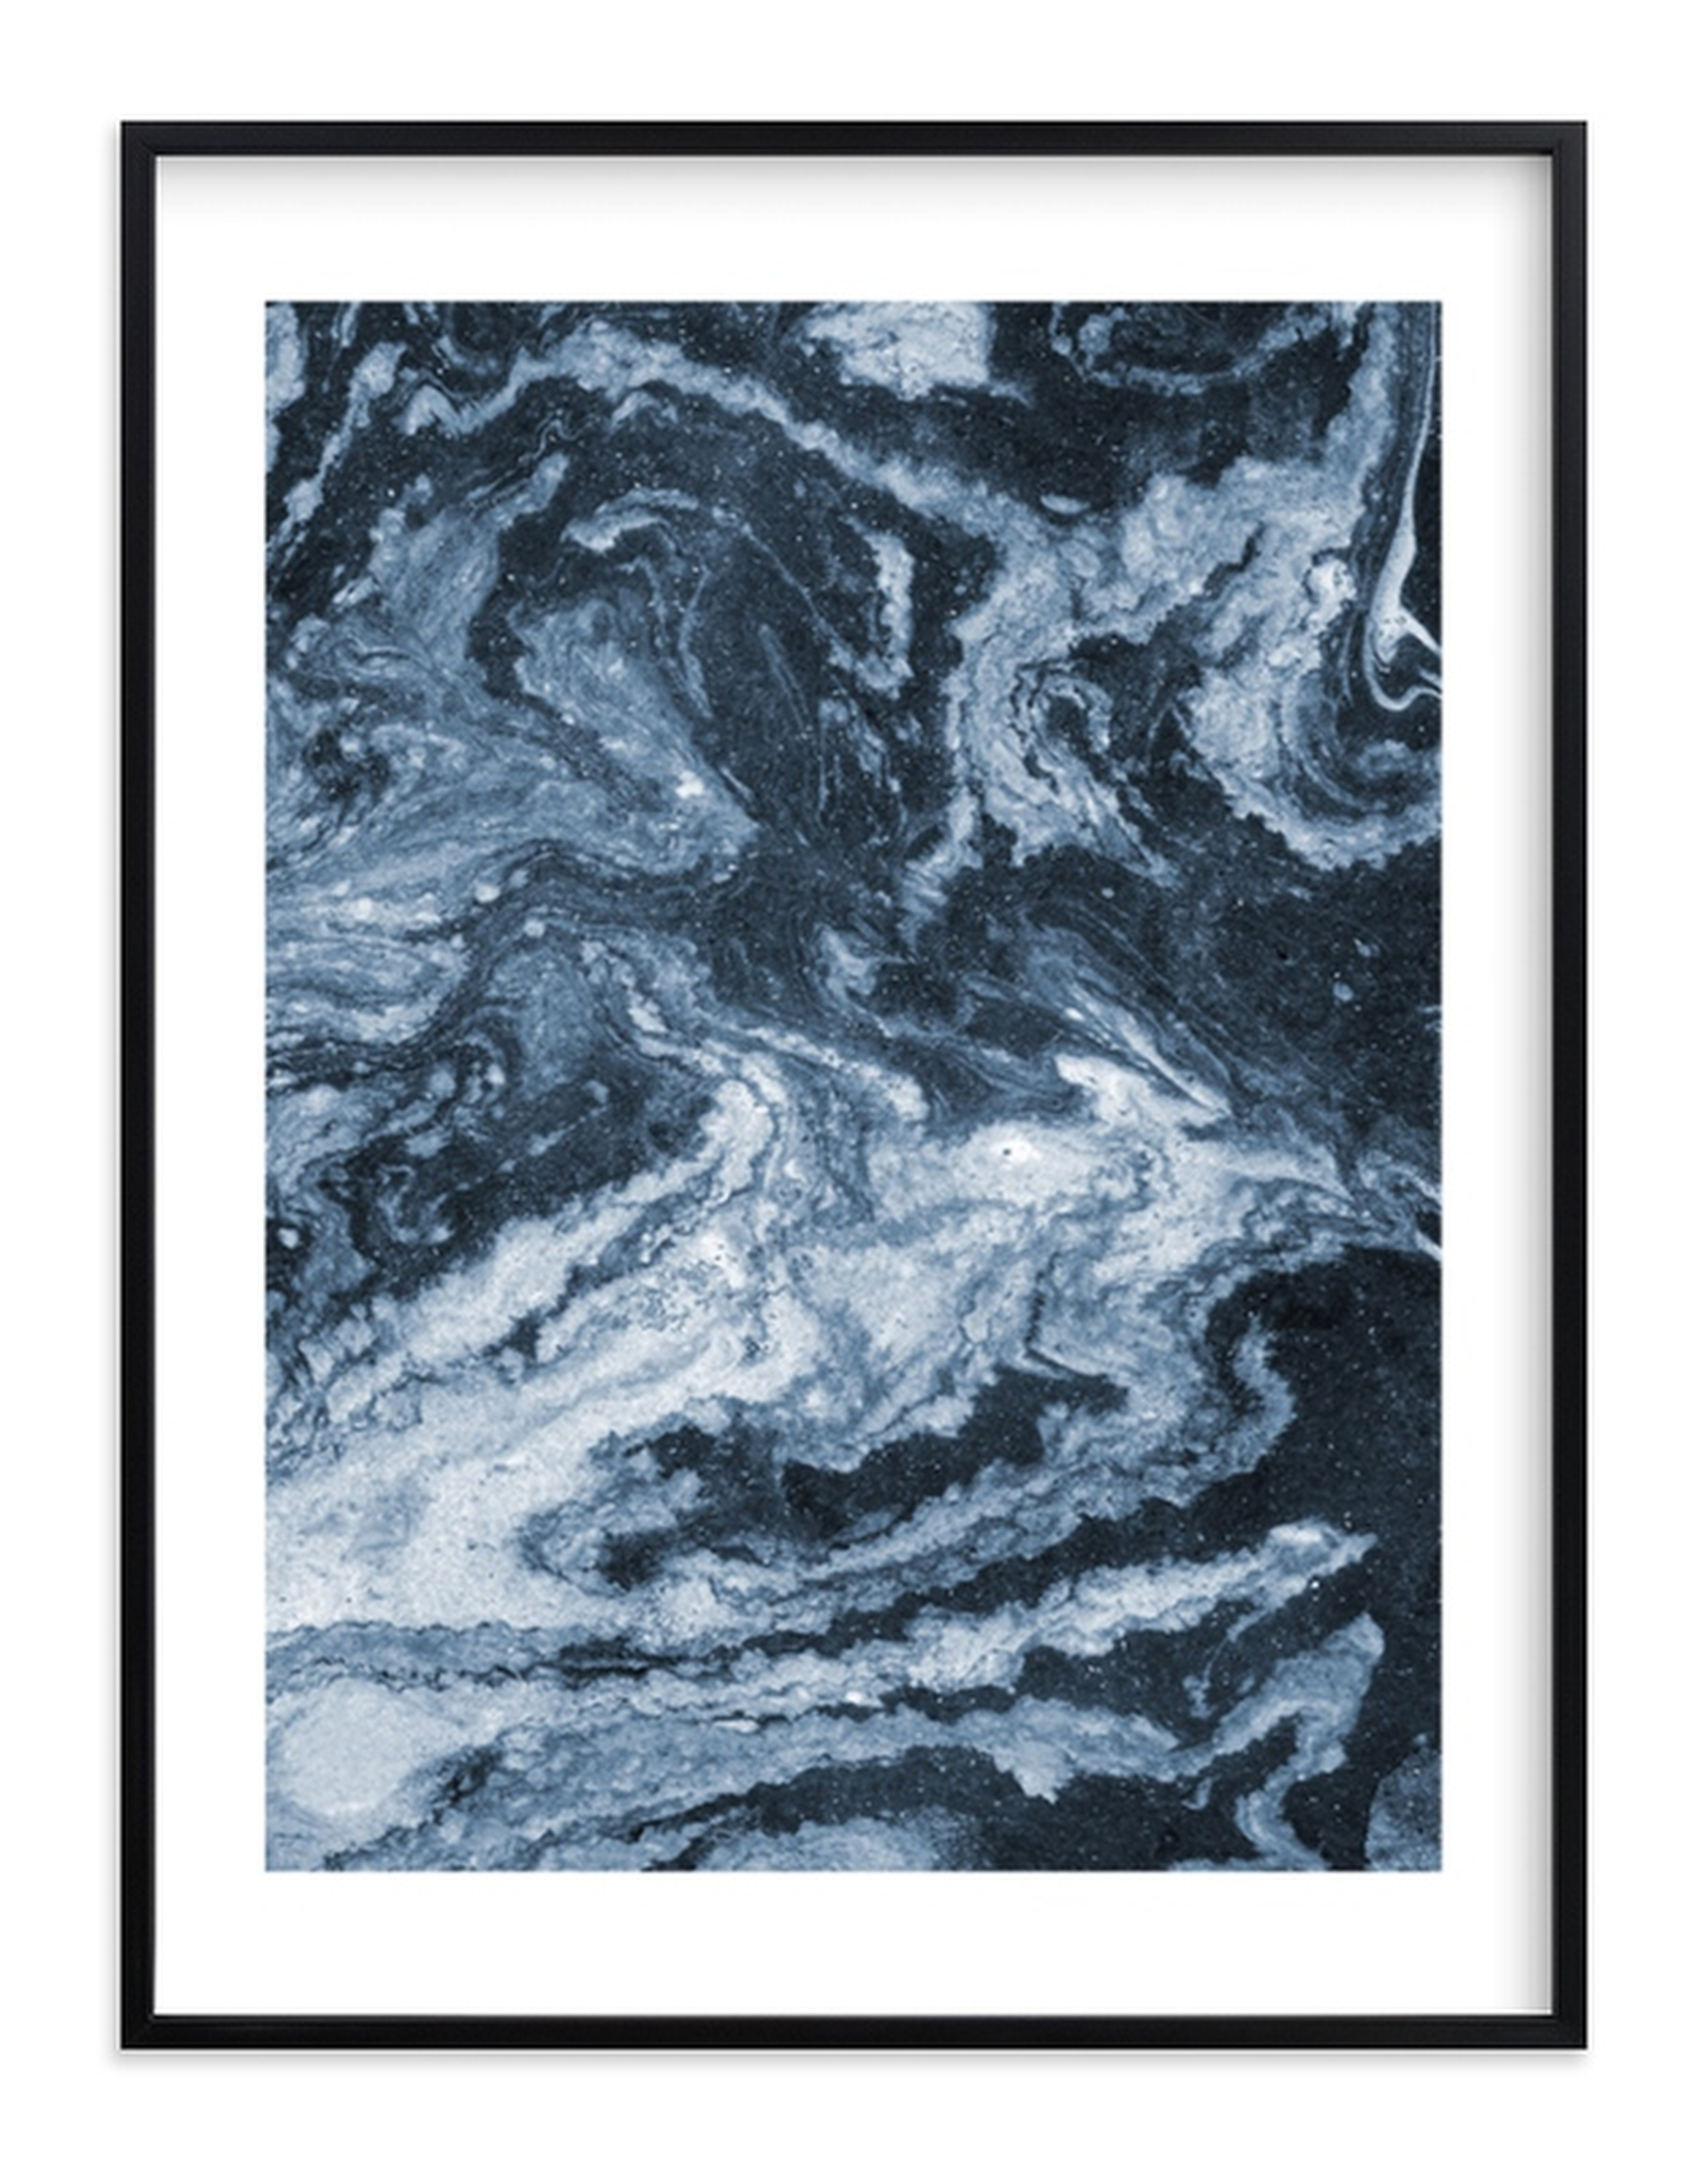 flow no. 3 - Framed artwork with white border - 30"x40" - Minted